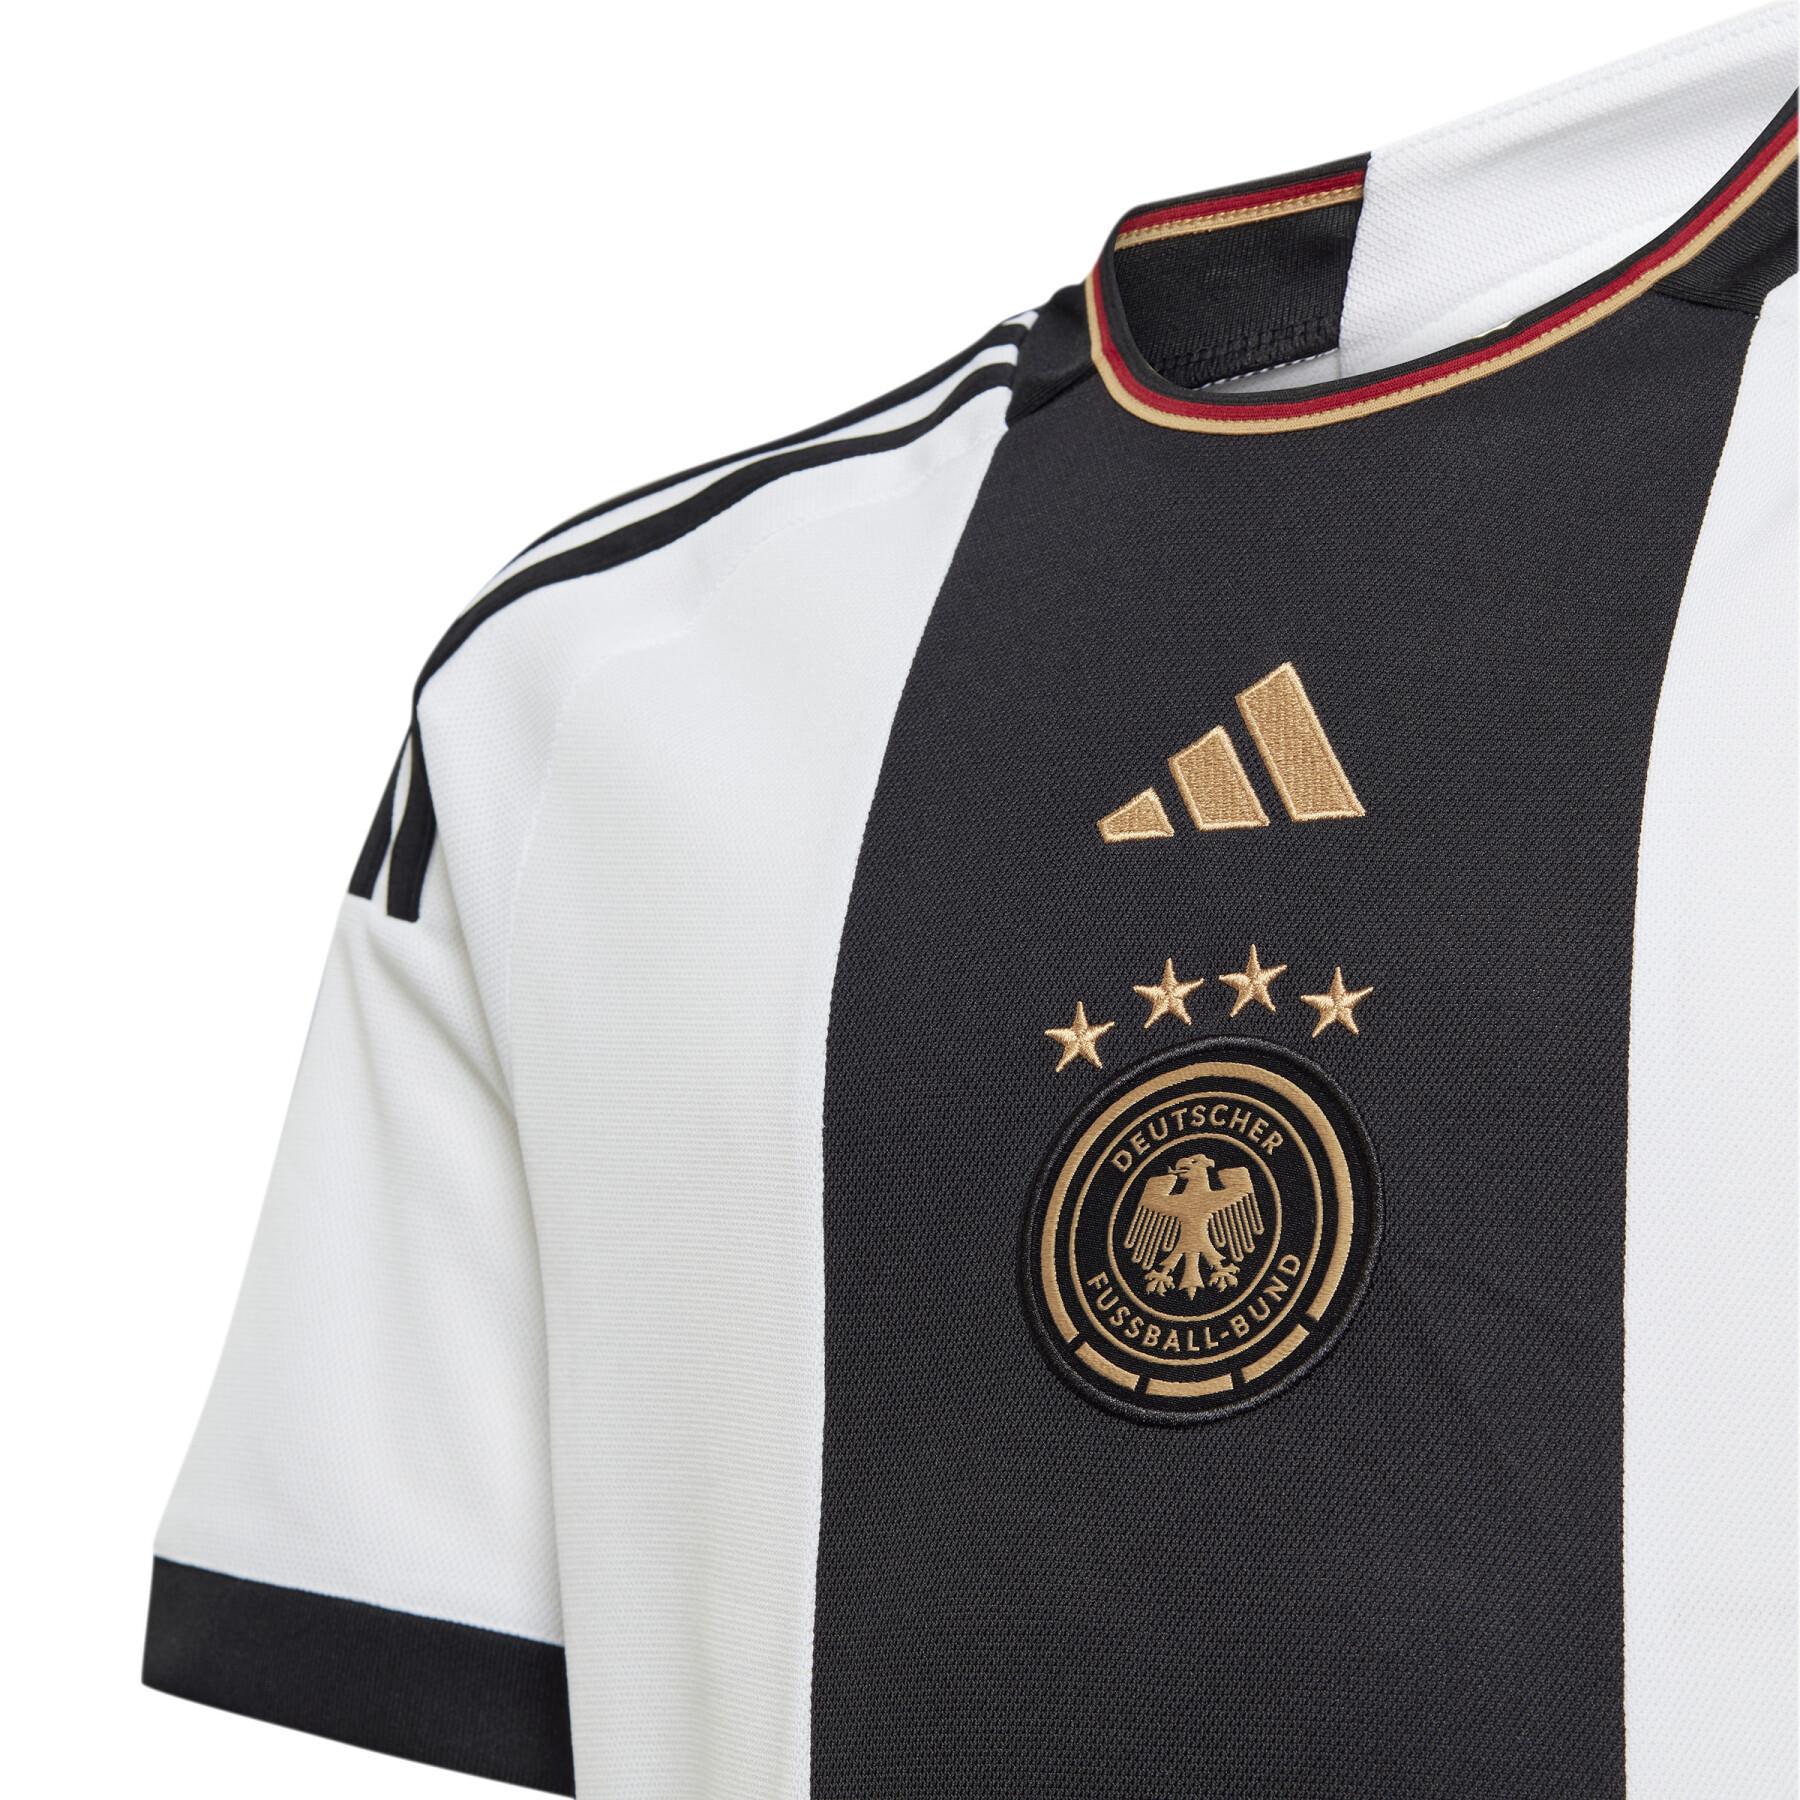 Home jersey child World Cup 2022 Germany